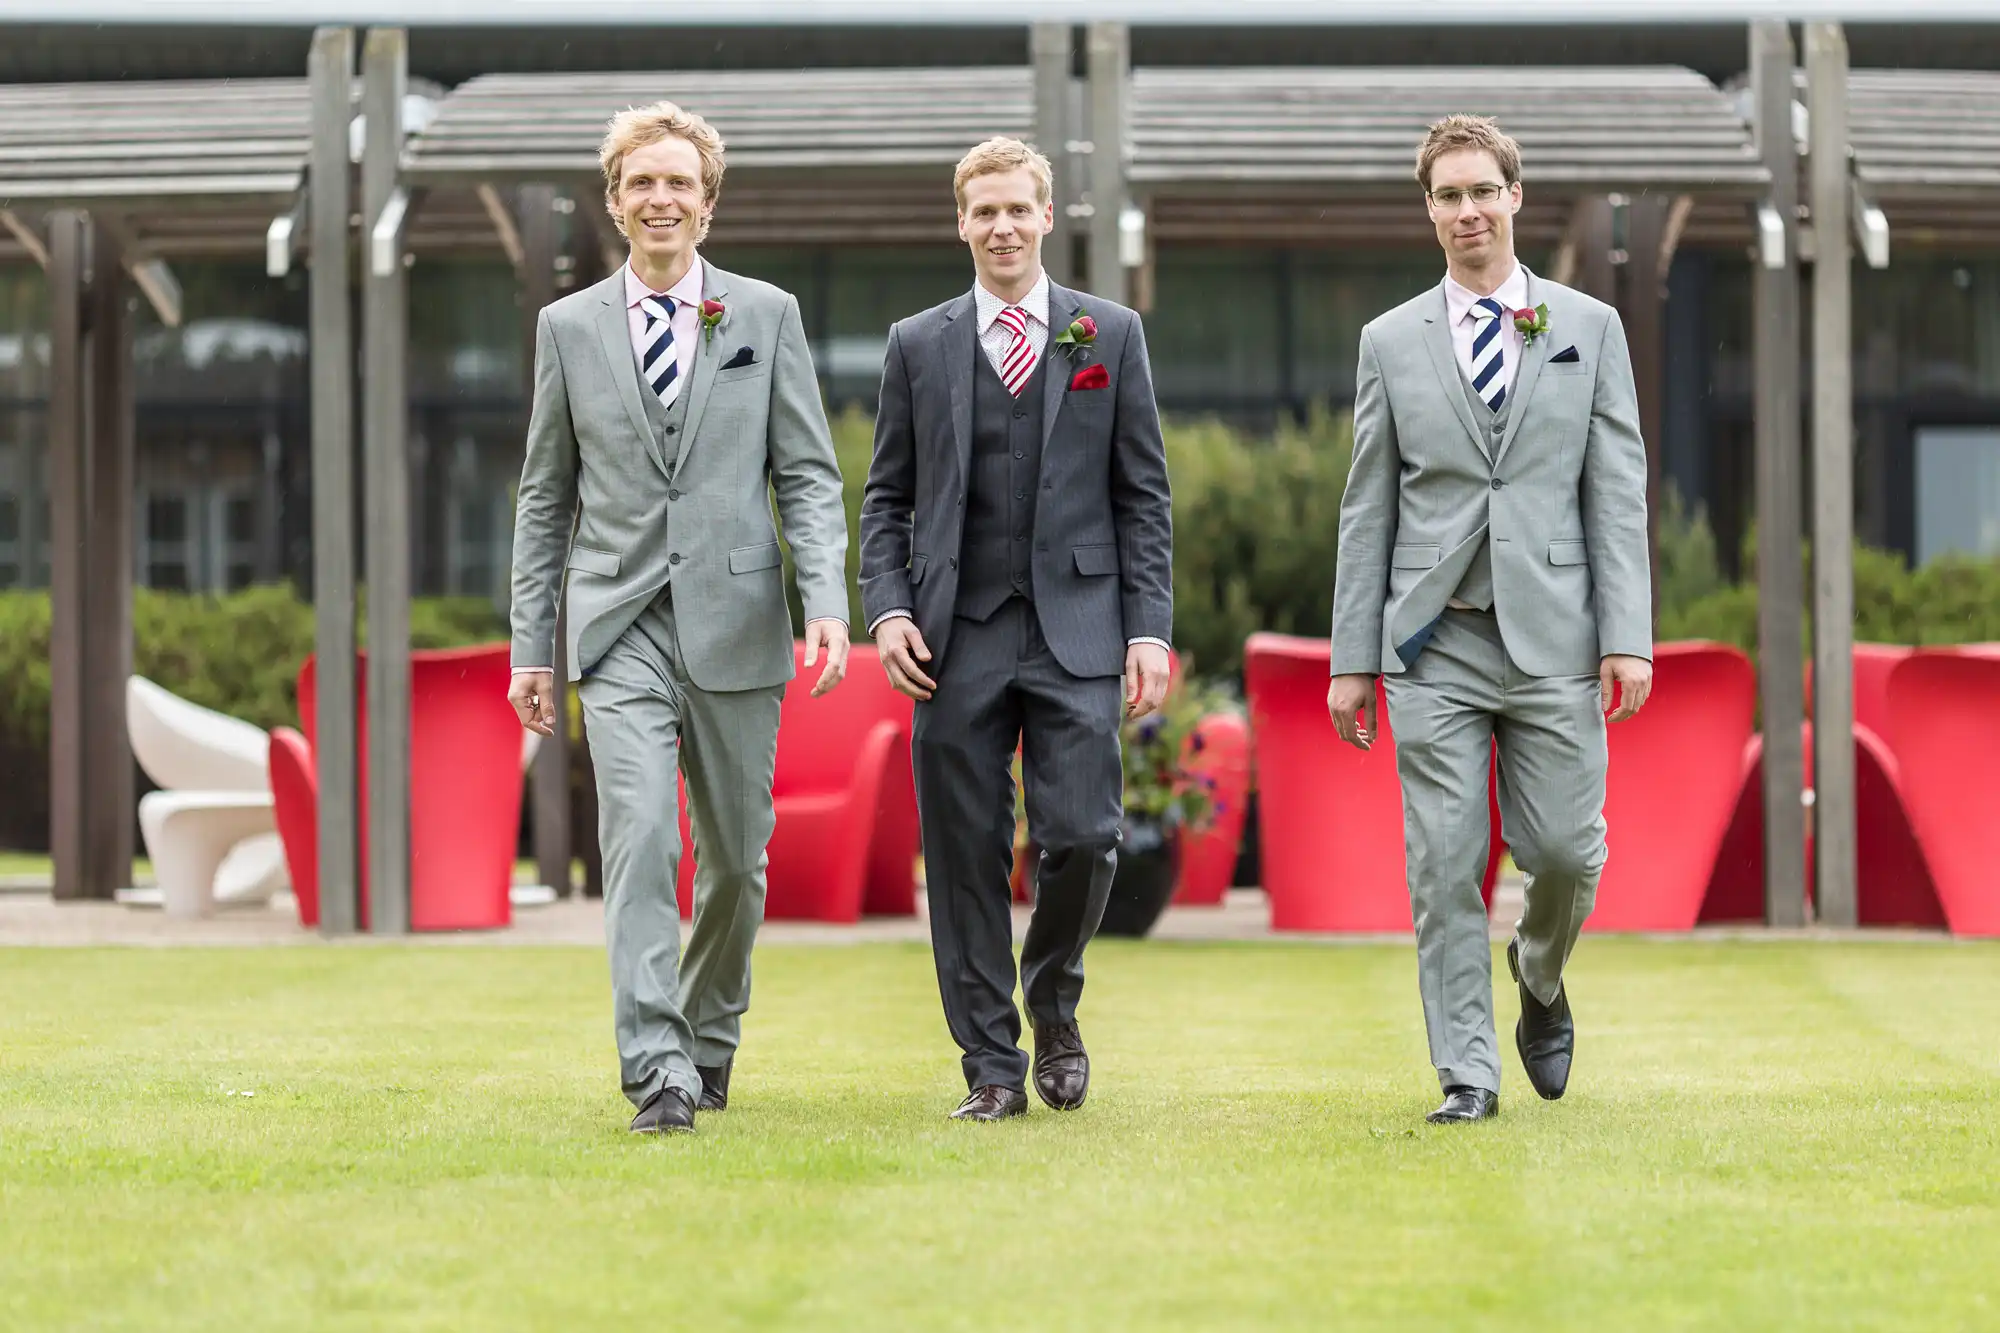 Three men in suits and boutonnieres walking across a lawn, smiling, with modern outdoor furniture in the background.